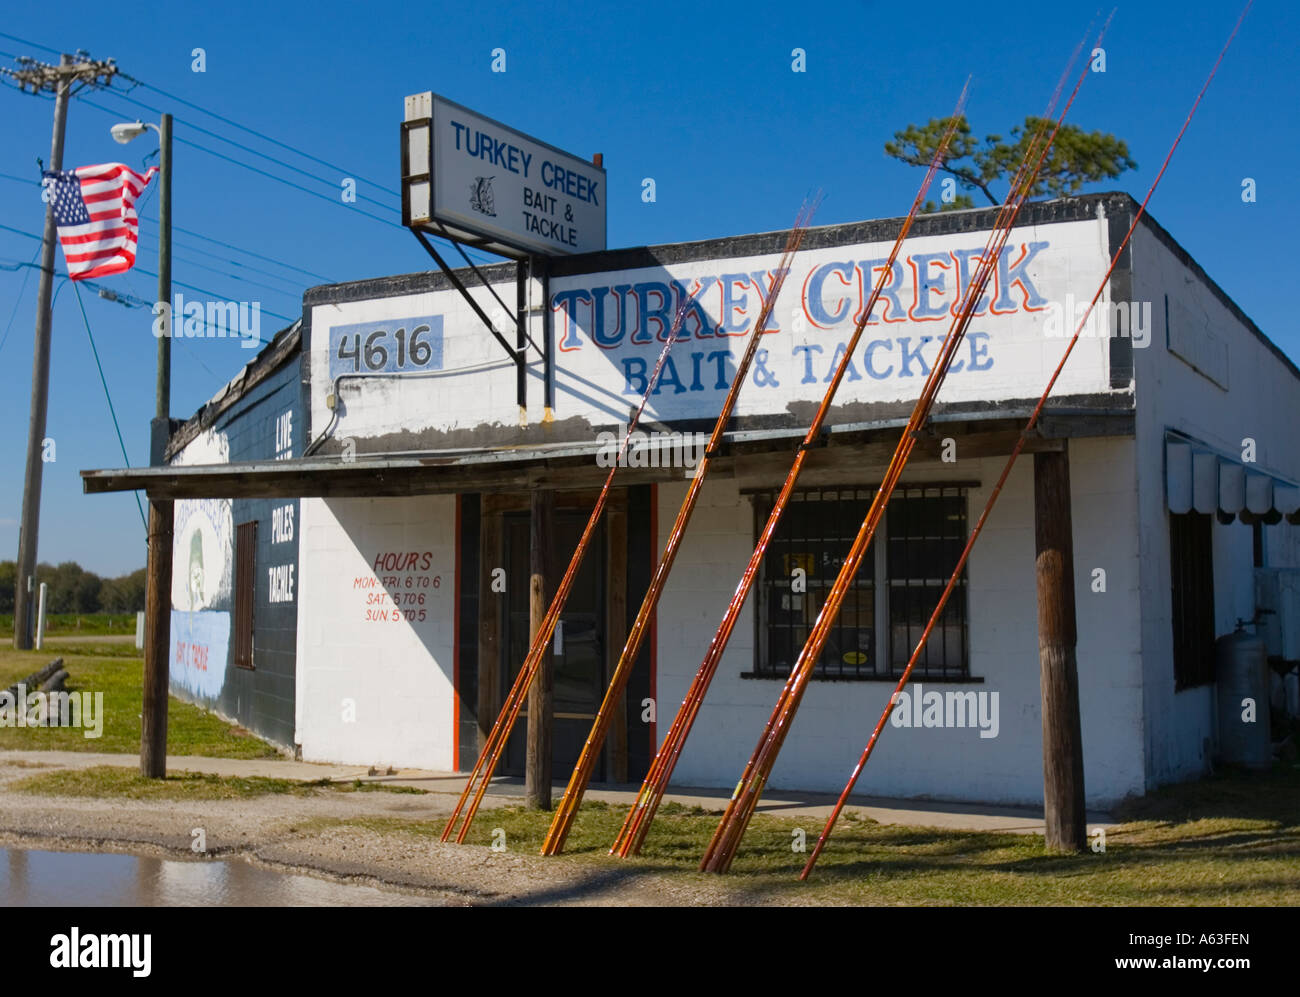 Bait and tackle shop Stock Photo - Alamy